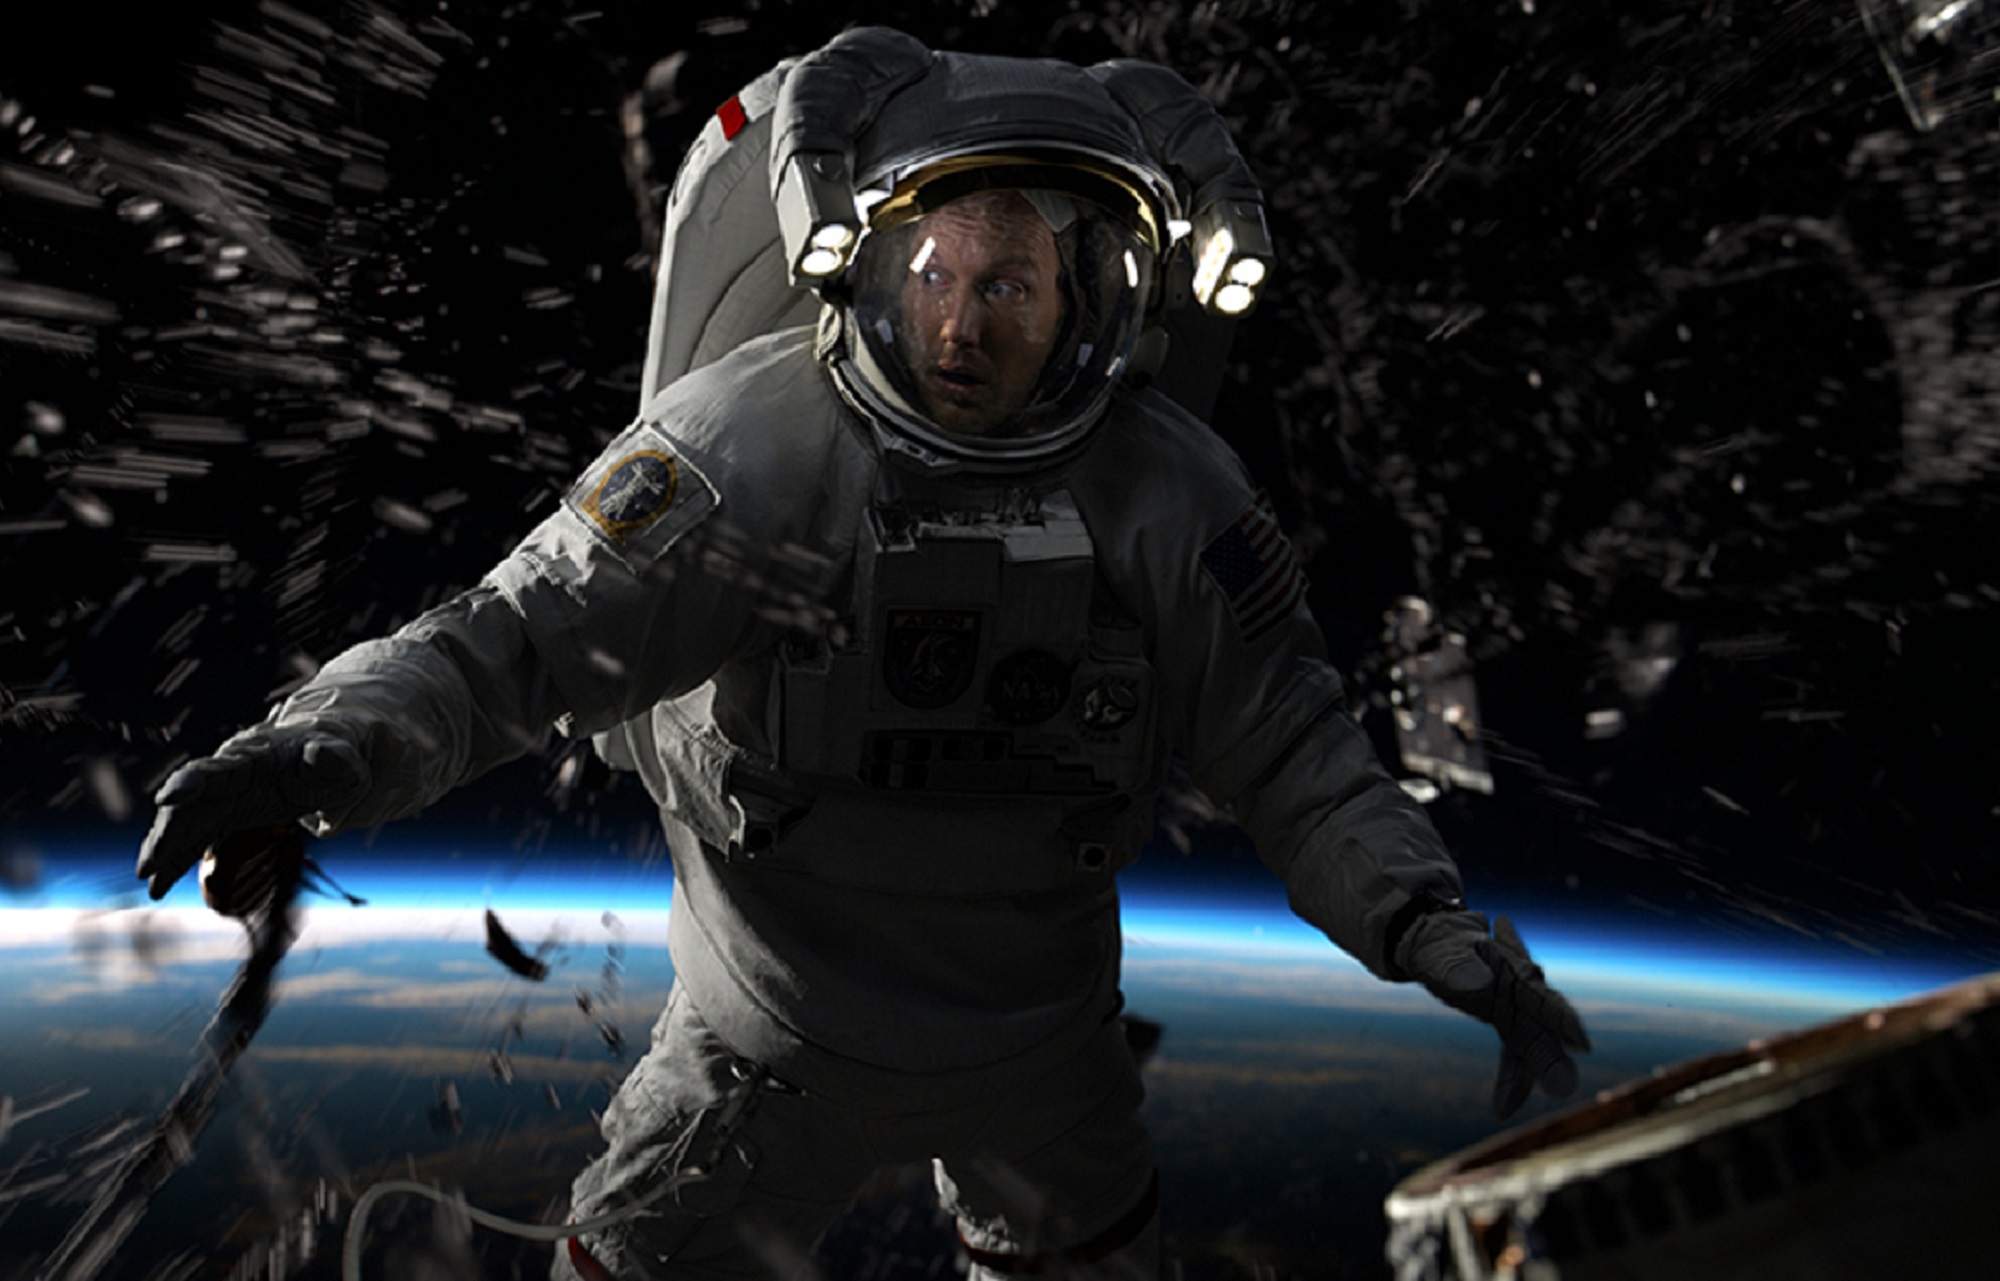 What happens if you get diarrhea in space?